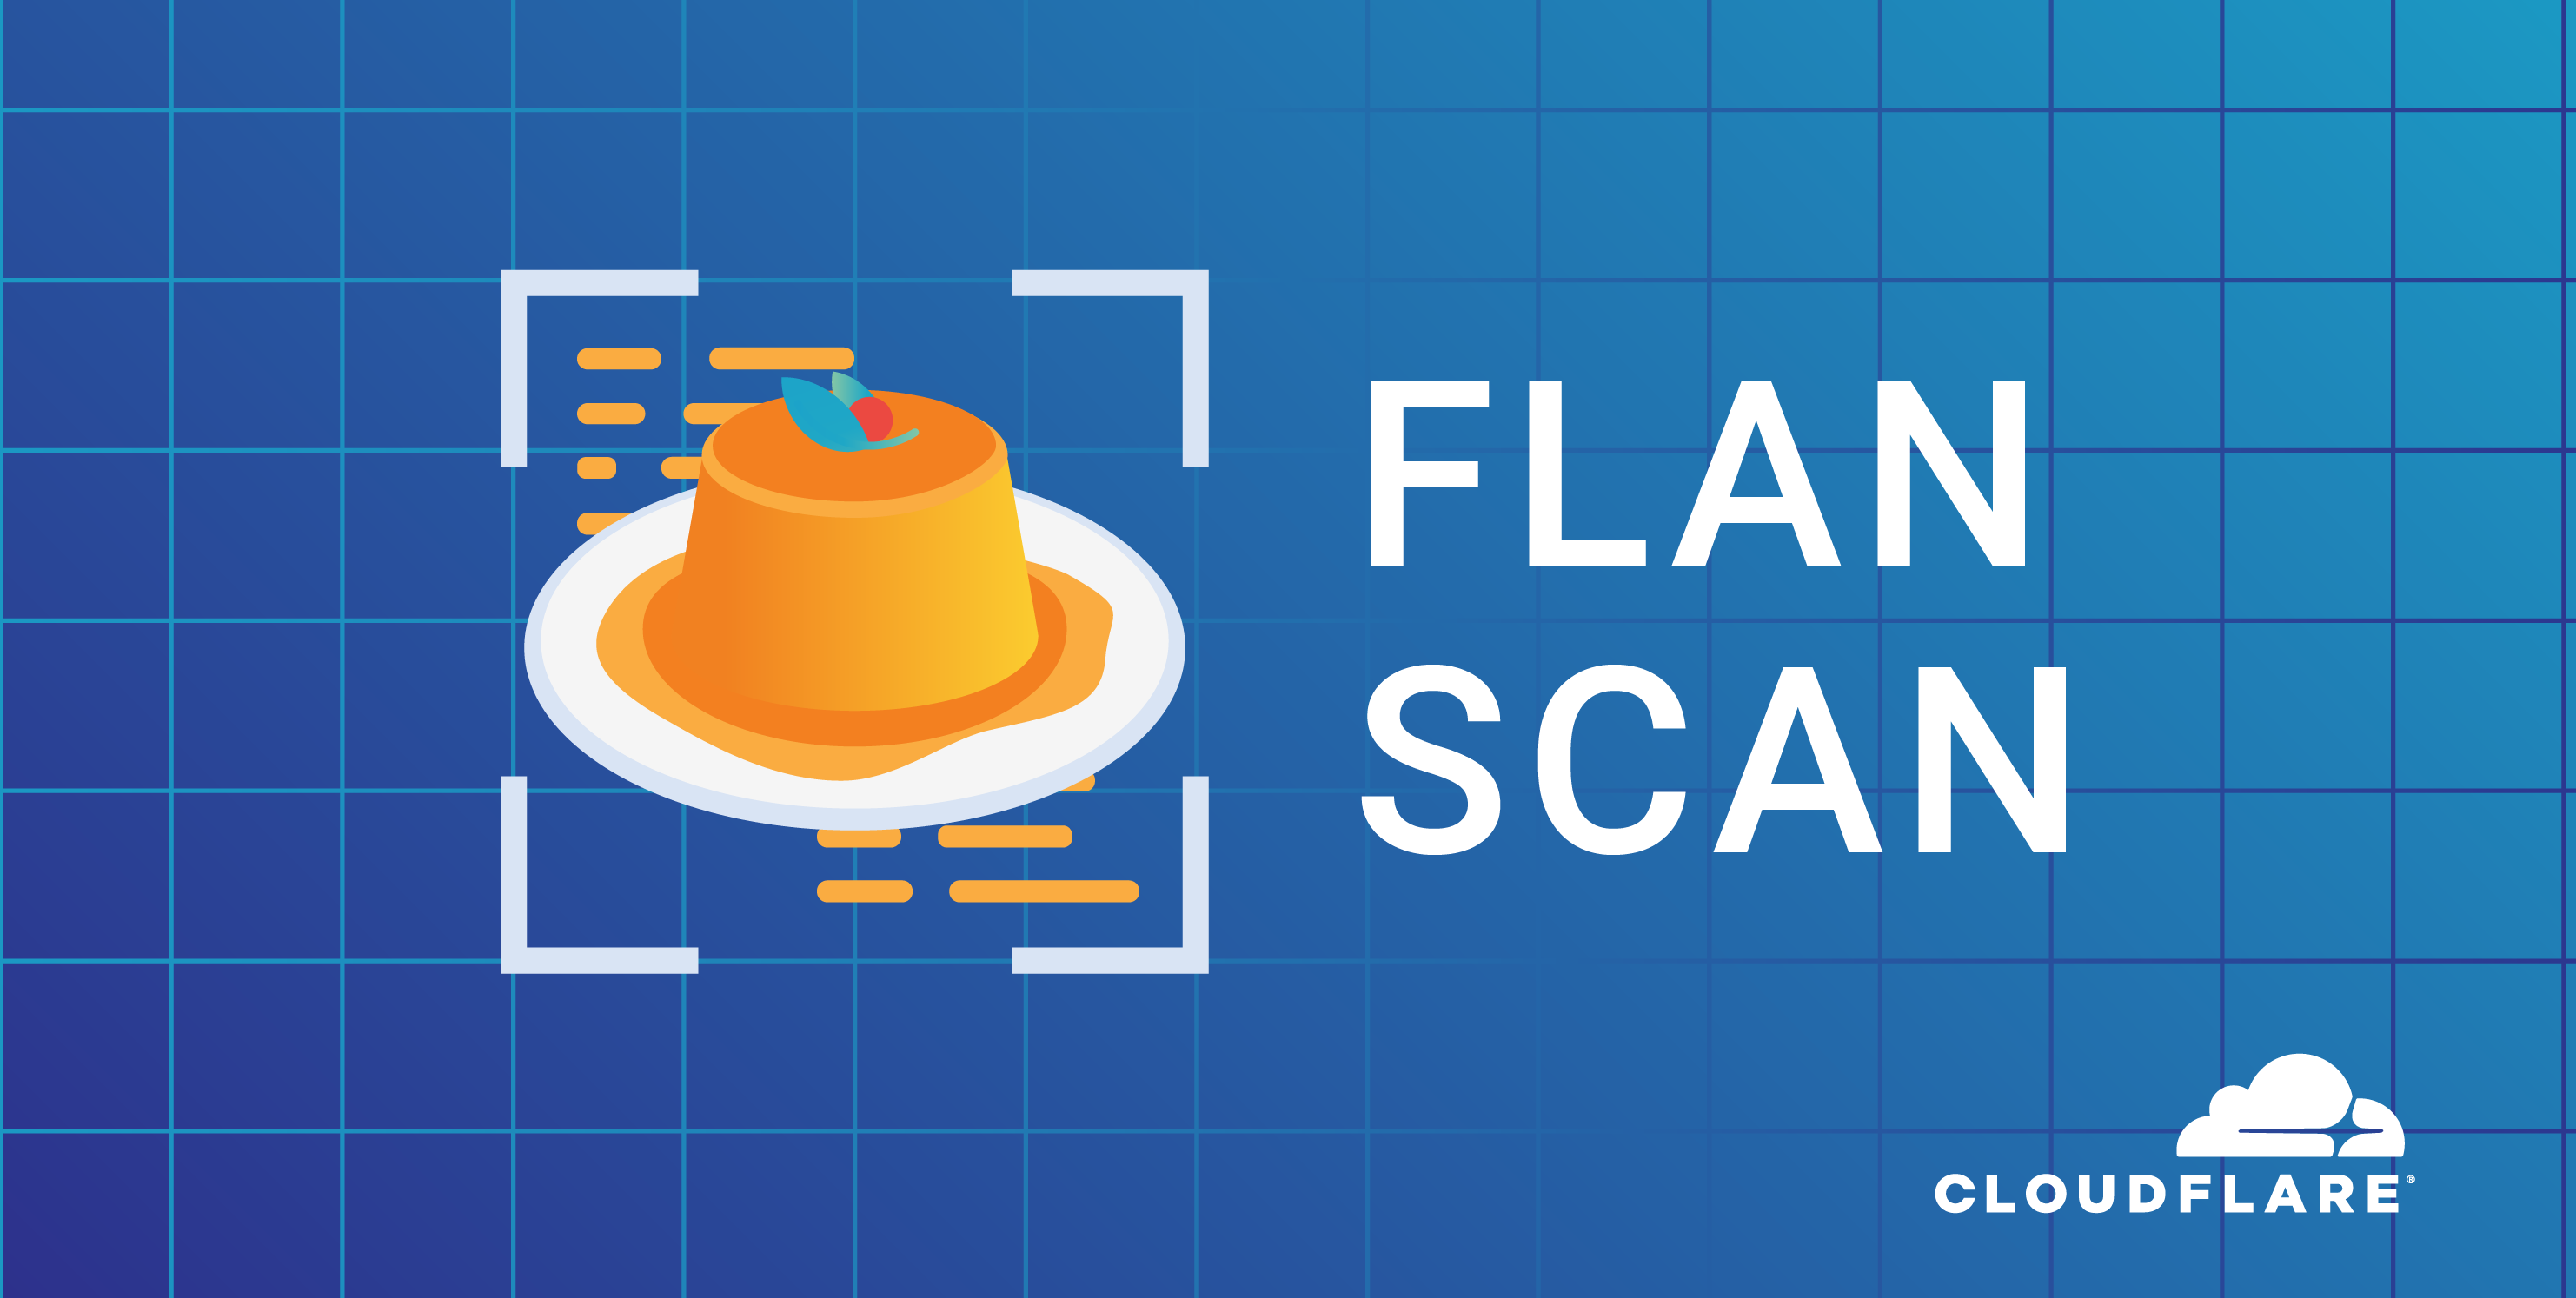 Introducing Flan Scan: Cloudflare’s Lightweight Network Vulnerability Scanner